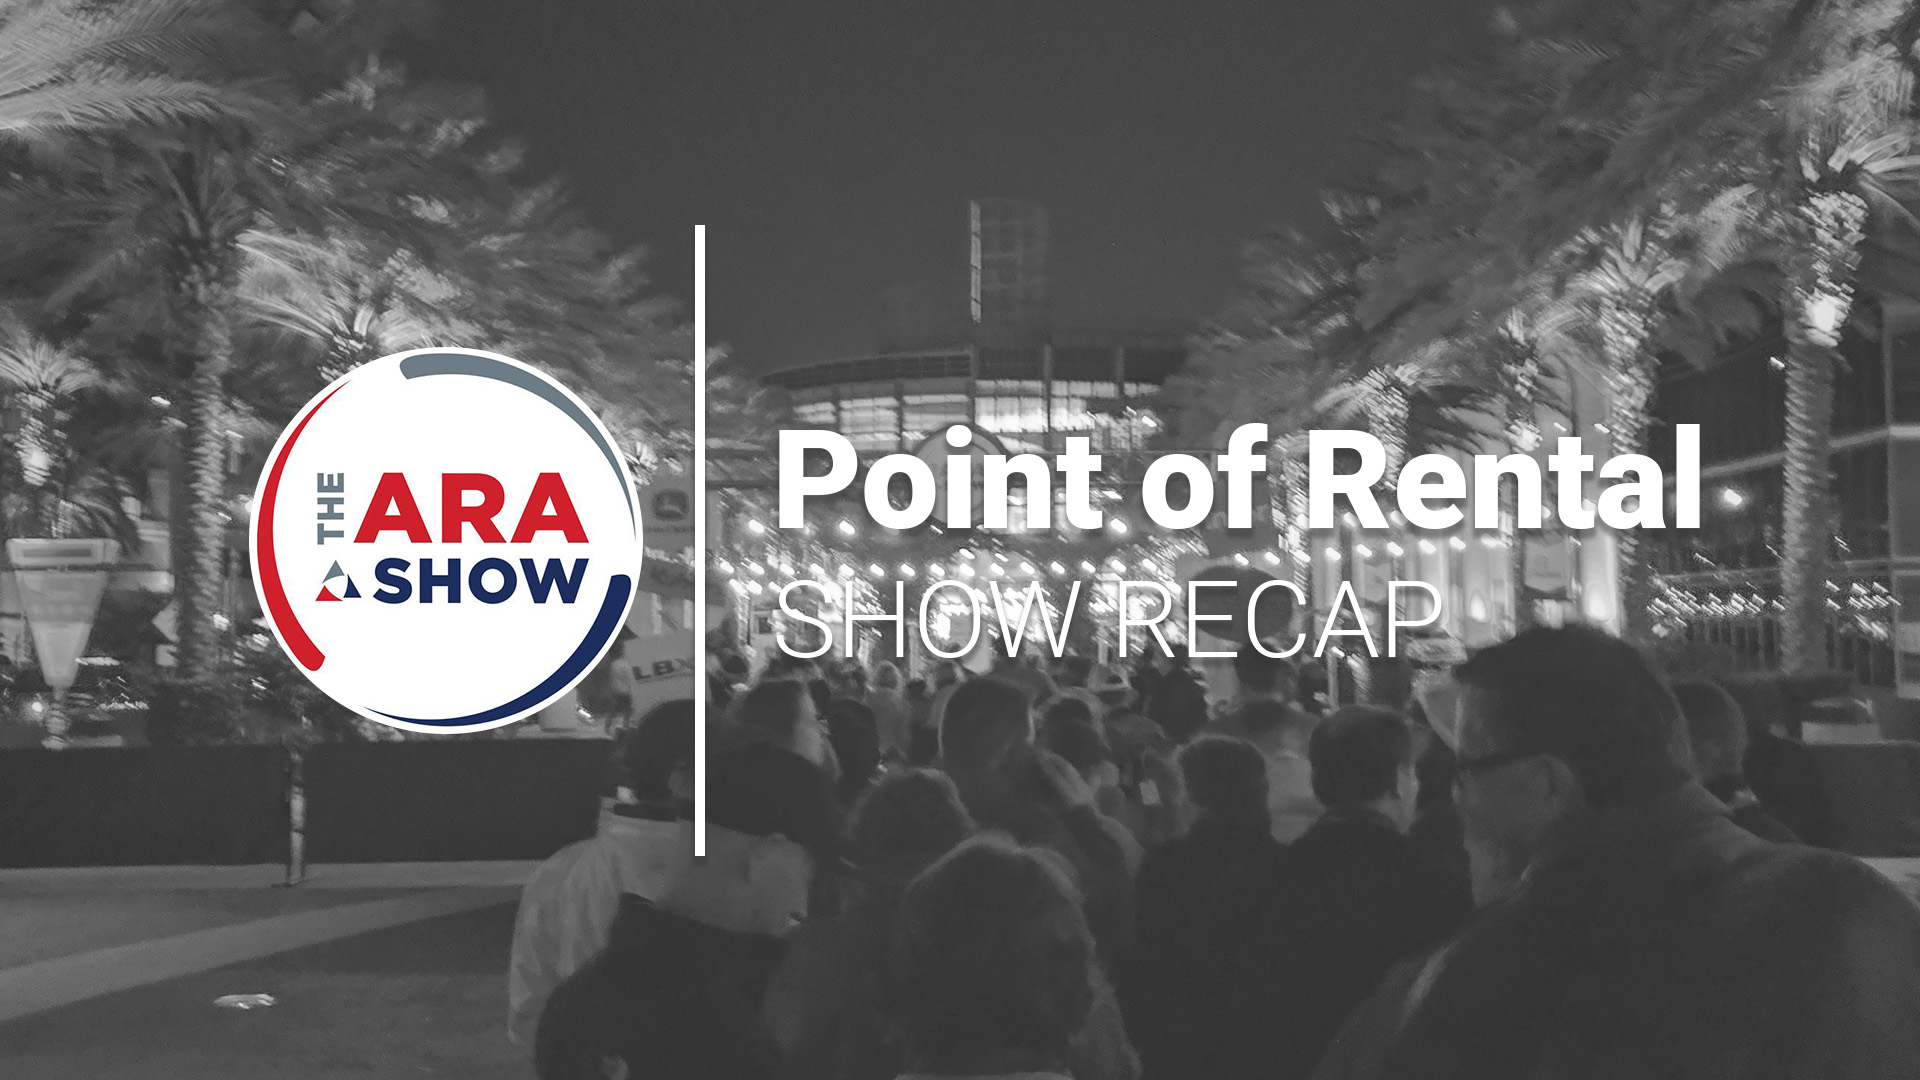 Point of Rental had a great 2019 ARA Show! Thanks for joining us!